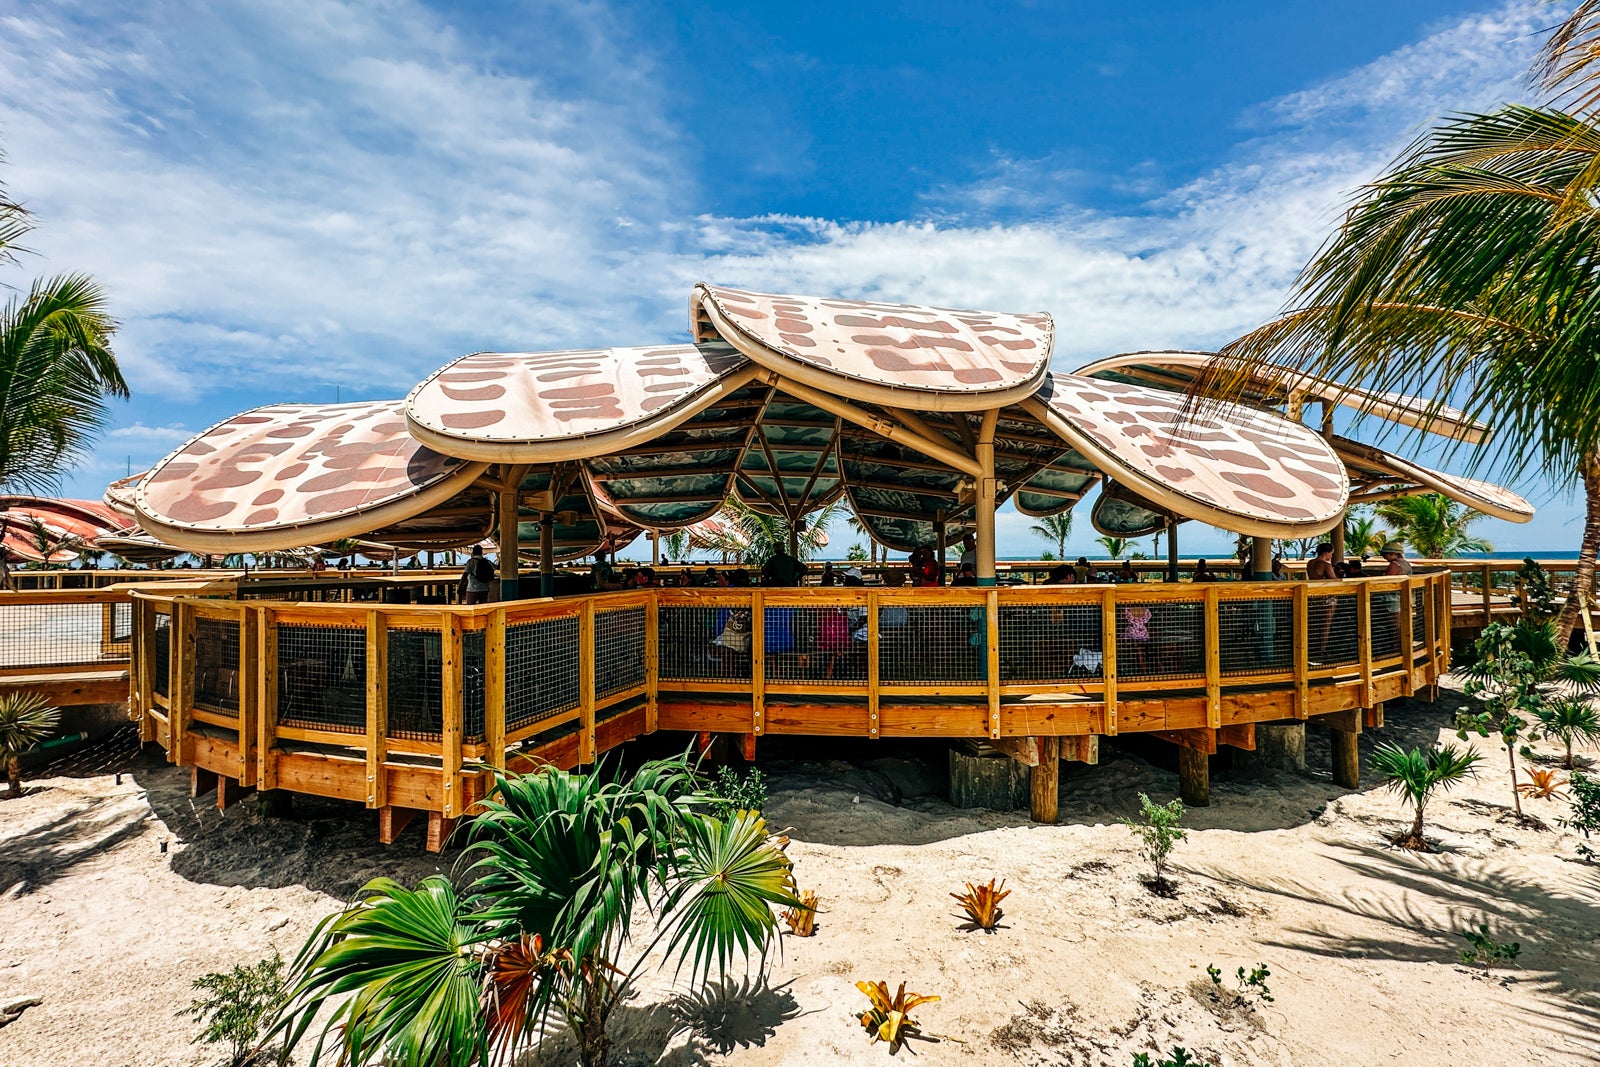 Covered dining pavilions on the beach